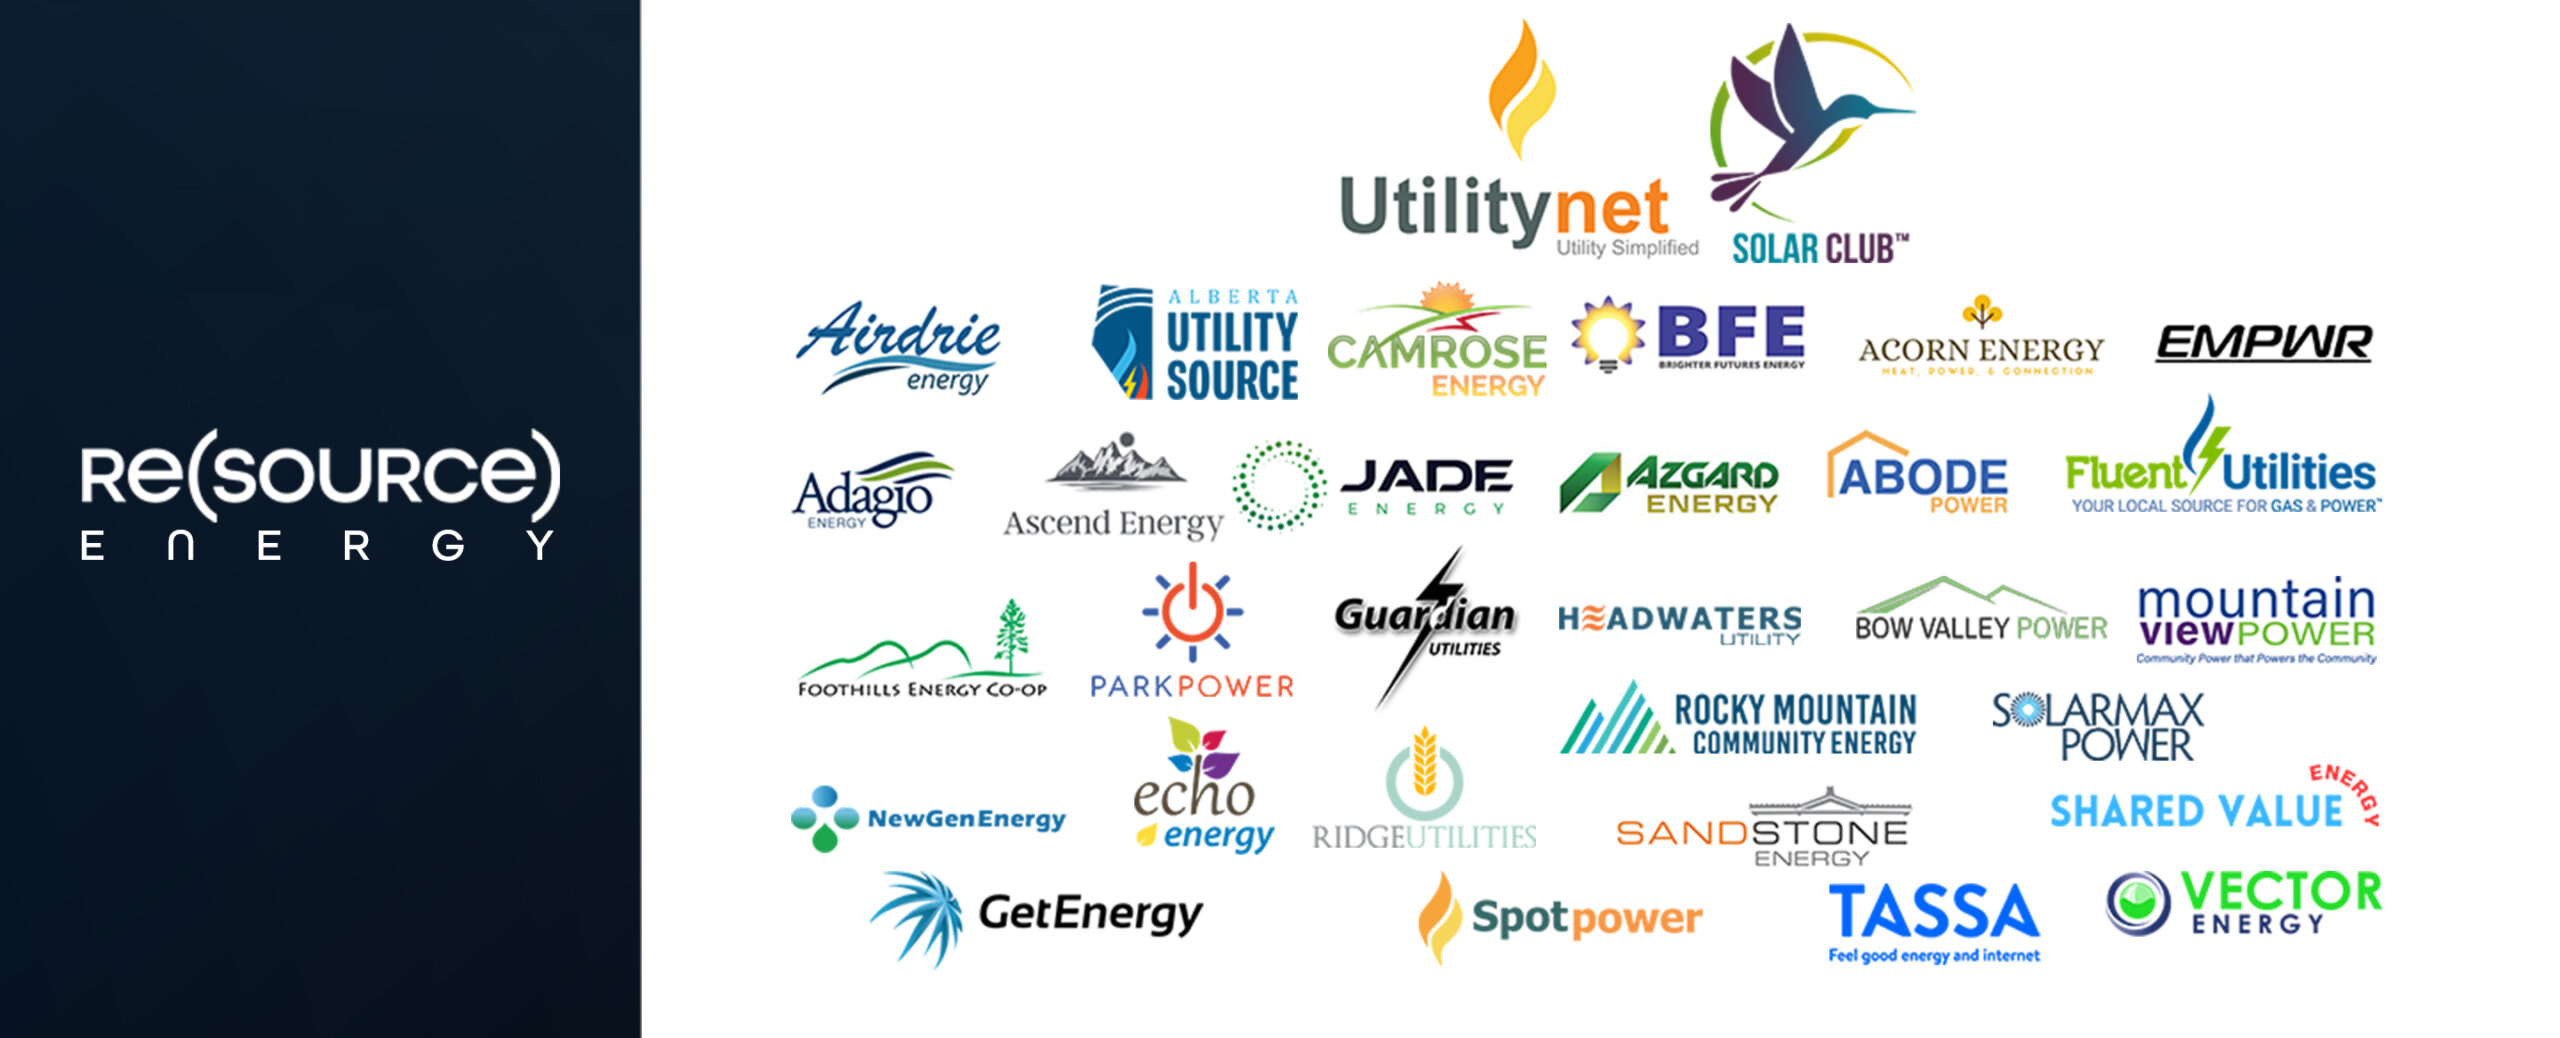 Re(source) Energy and the 30 community energy retailers that are a part of UtilityNet and The Solar Club